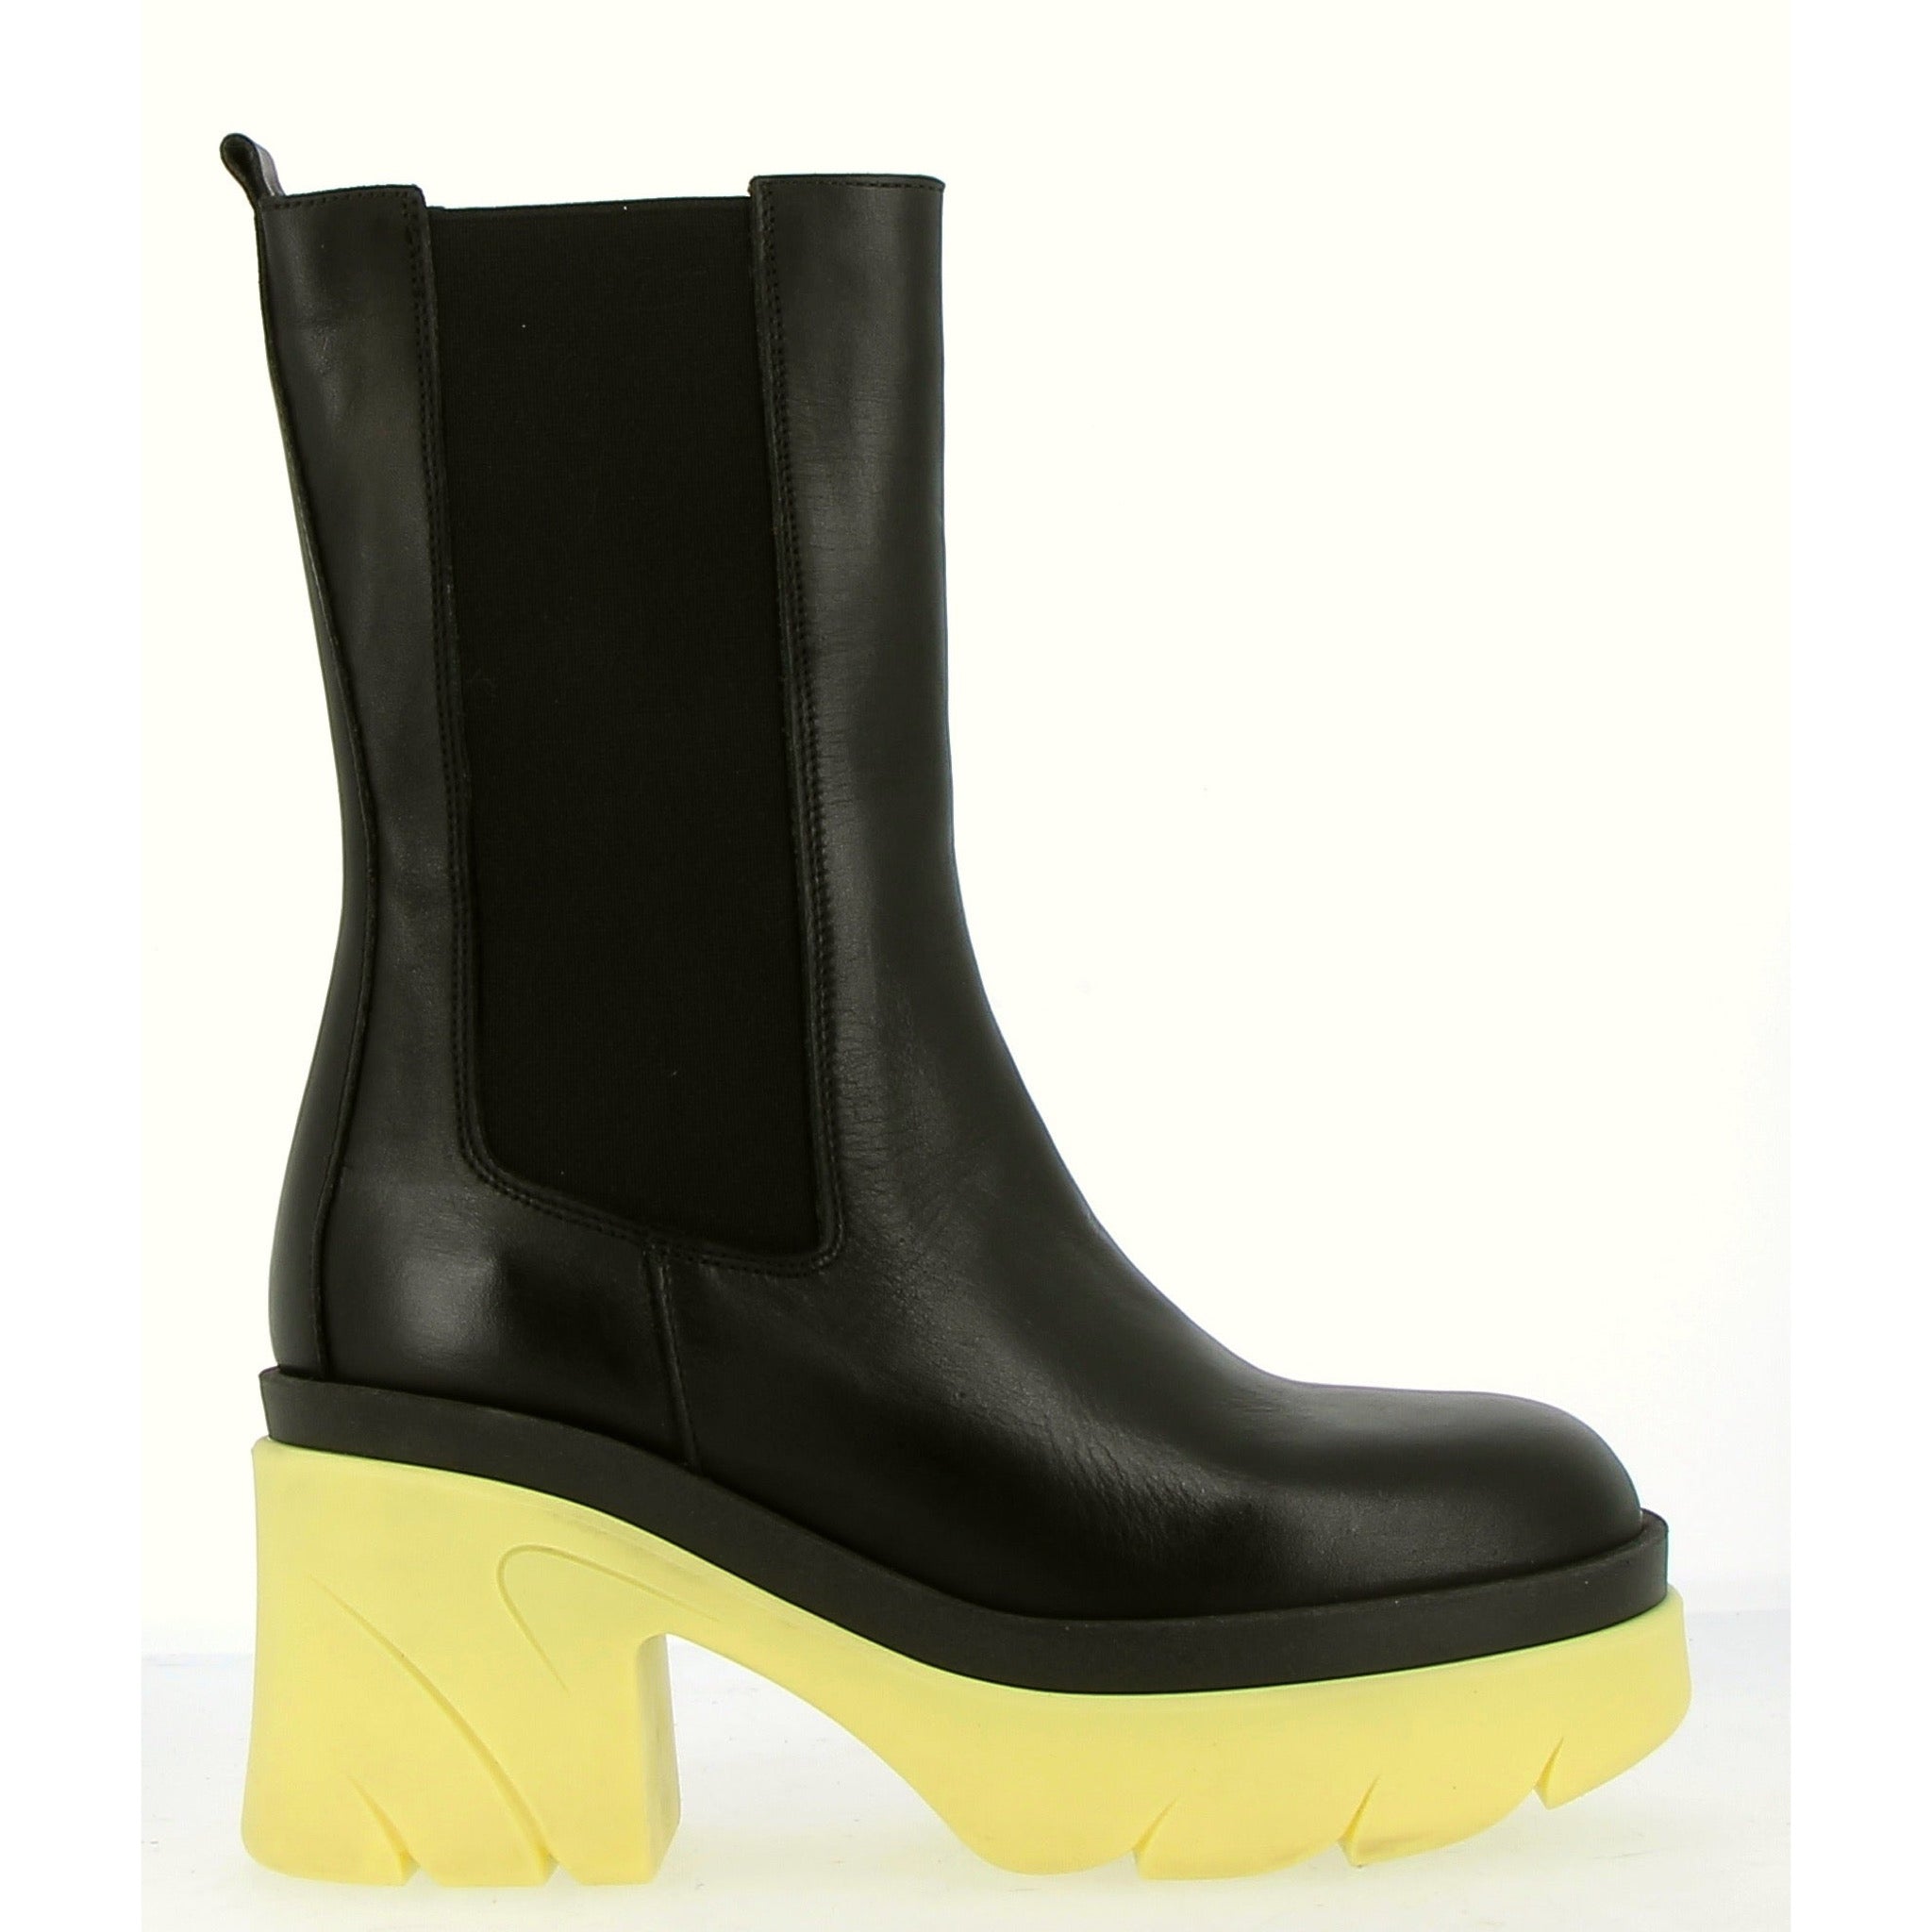 Black ankle boot with yellow rubber sole